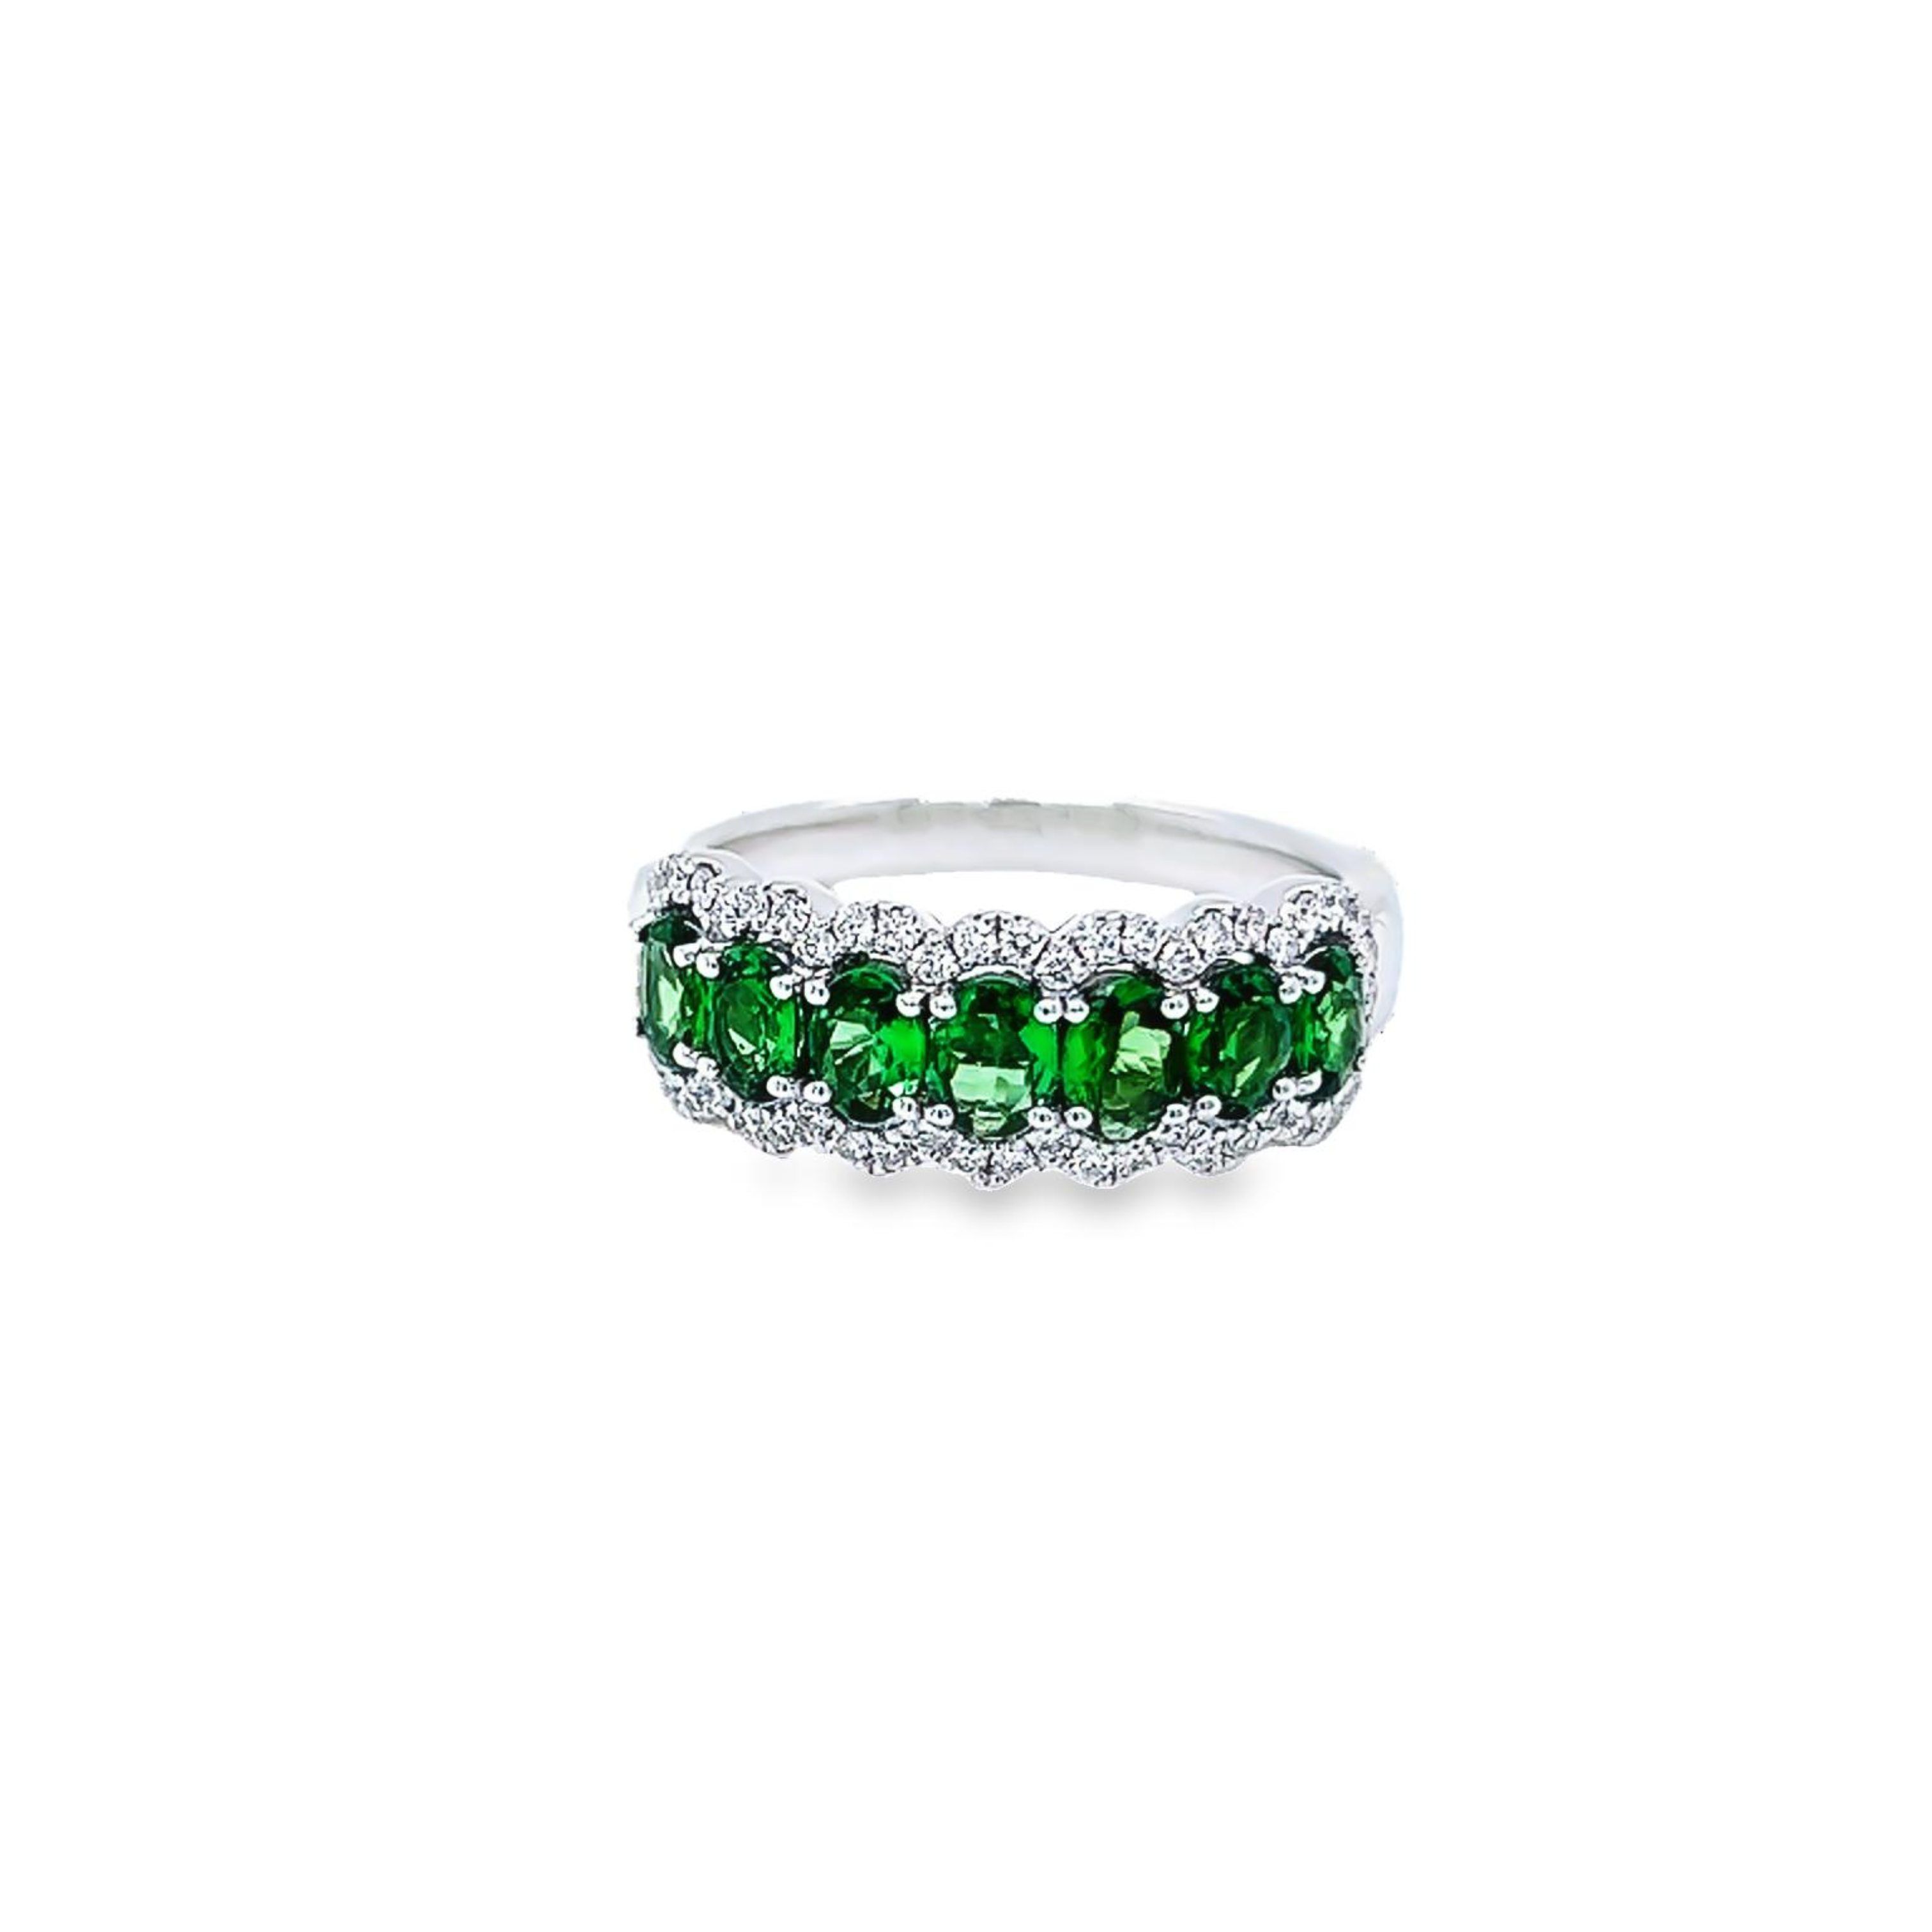 14 Karat White Gold Ring, Size 6.5, With 7=1.25 Total Weight Oval Tsavorite Garnets And 51=0.25 Total Weight Round Brilliant G Vs Diamonds